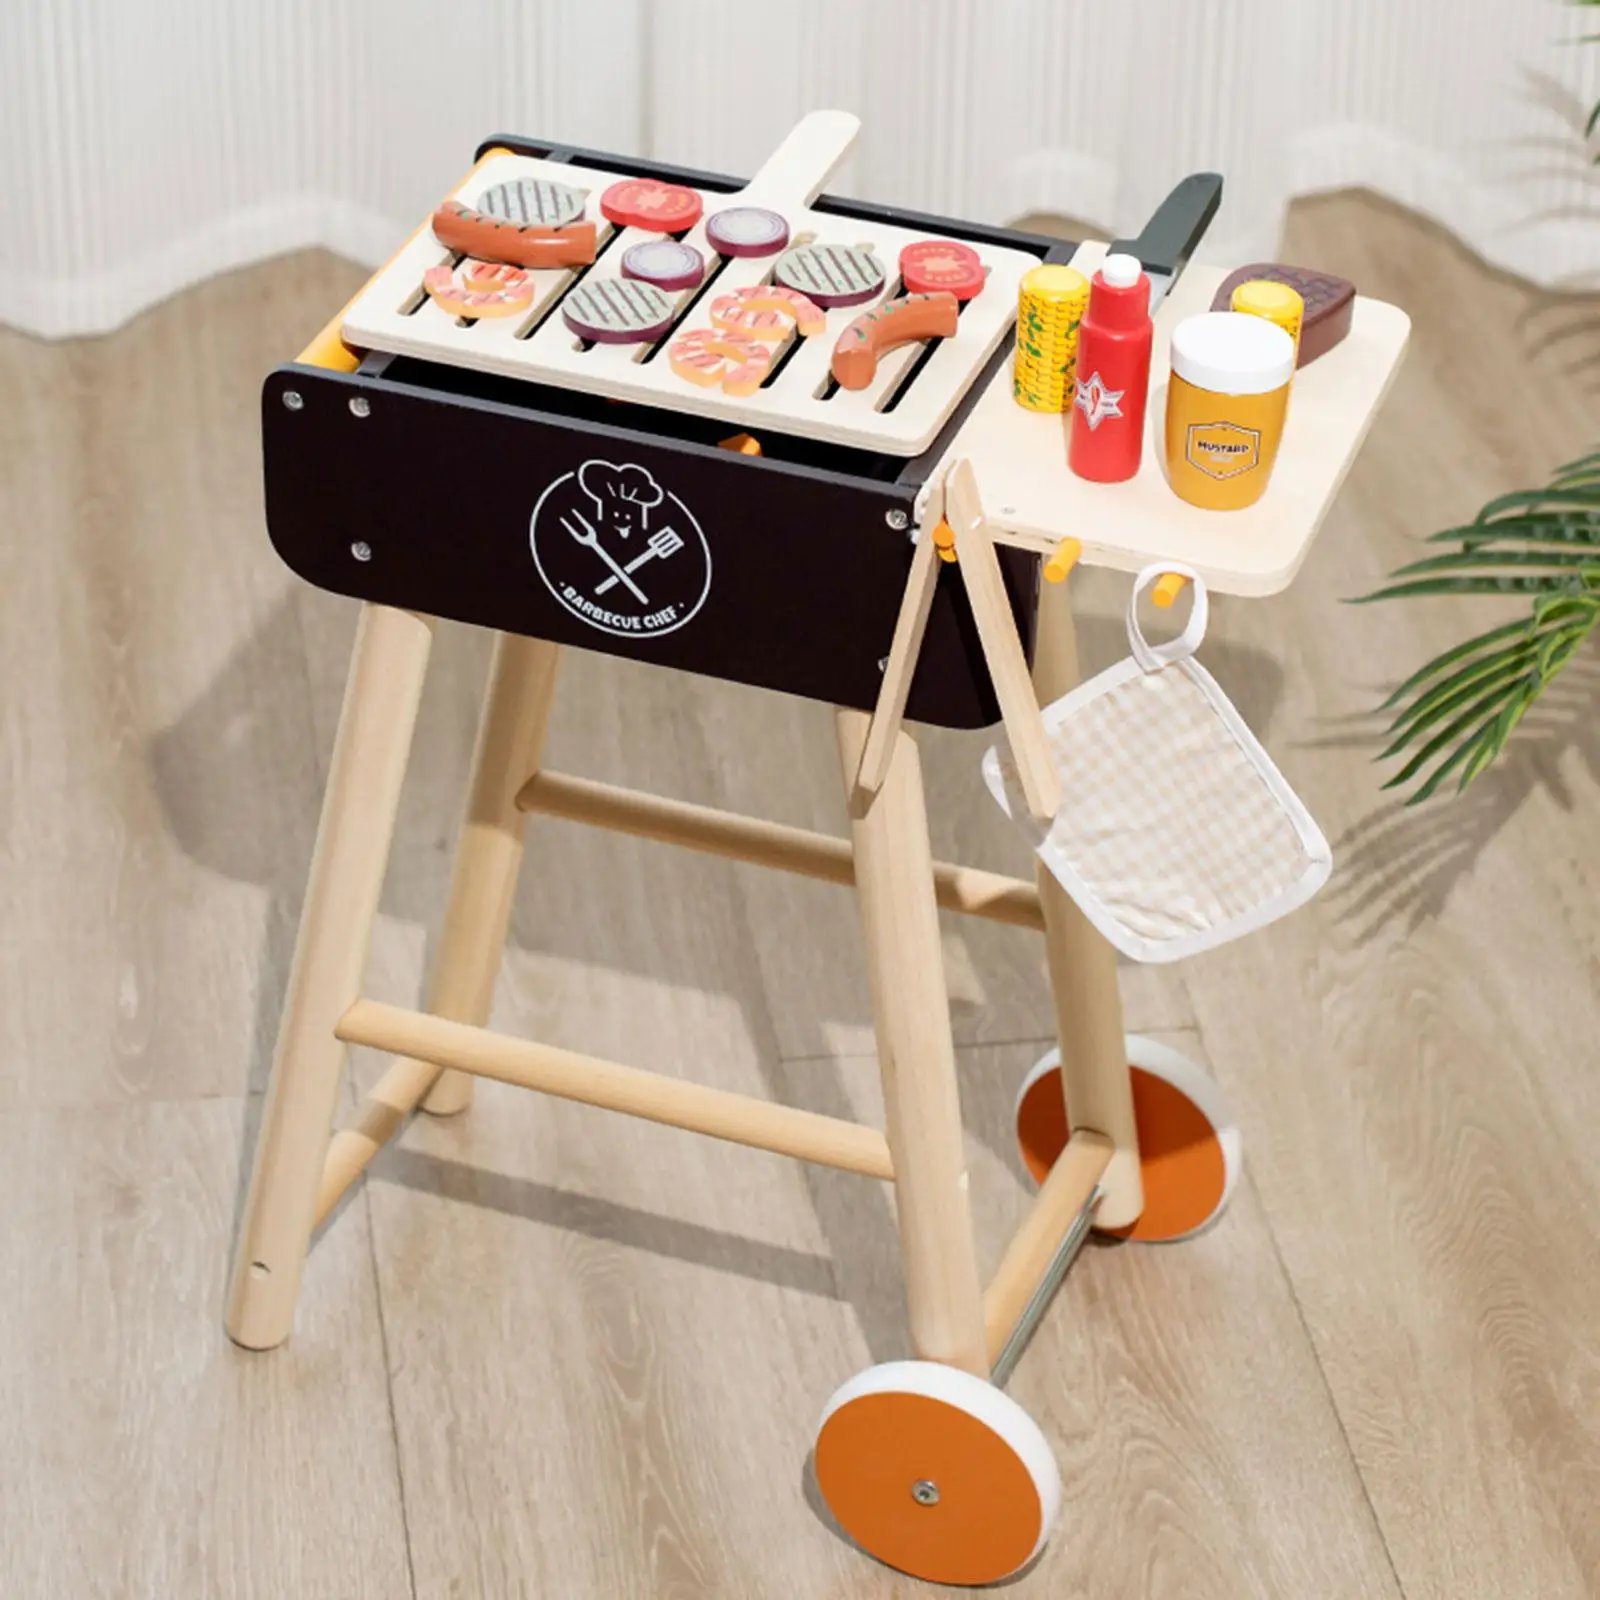 Realistic Kitchen BBQ Playset Role Playing Toy Barbecue Grill Toy for Girls